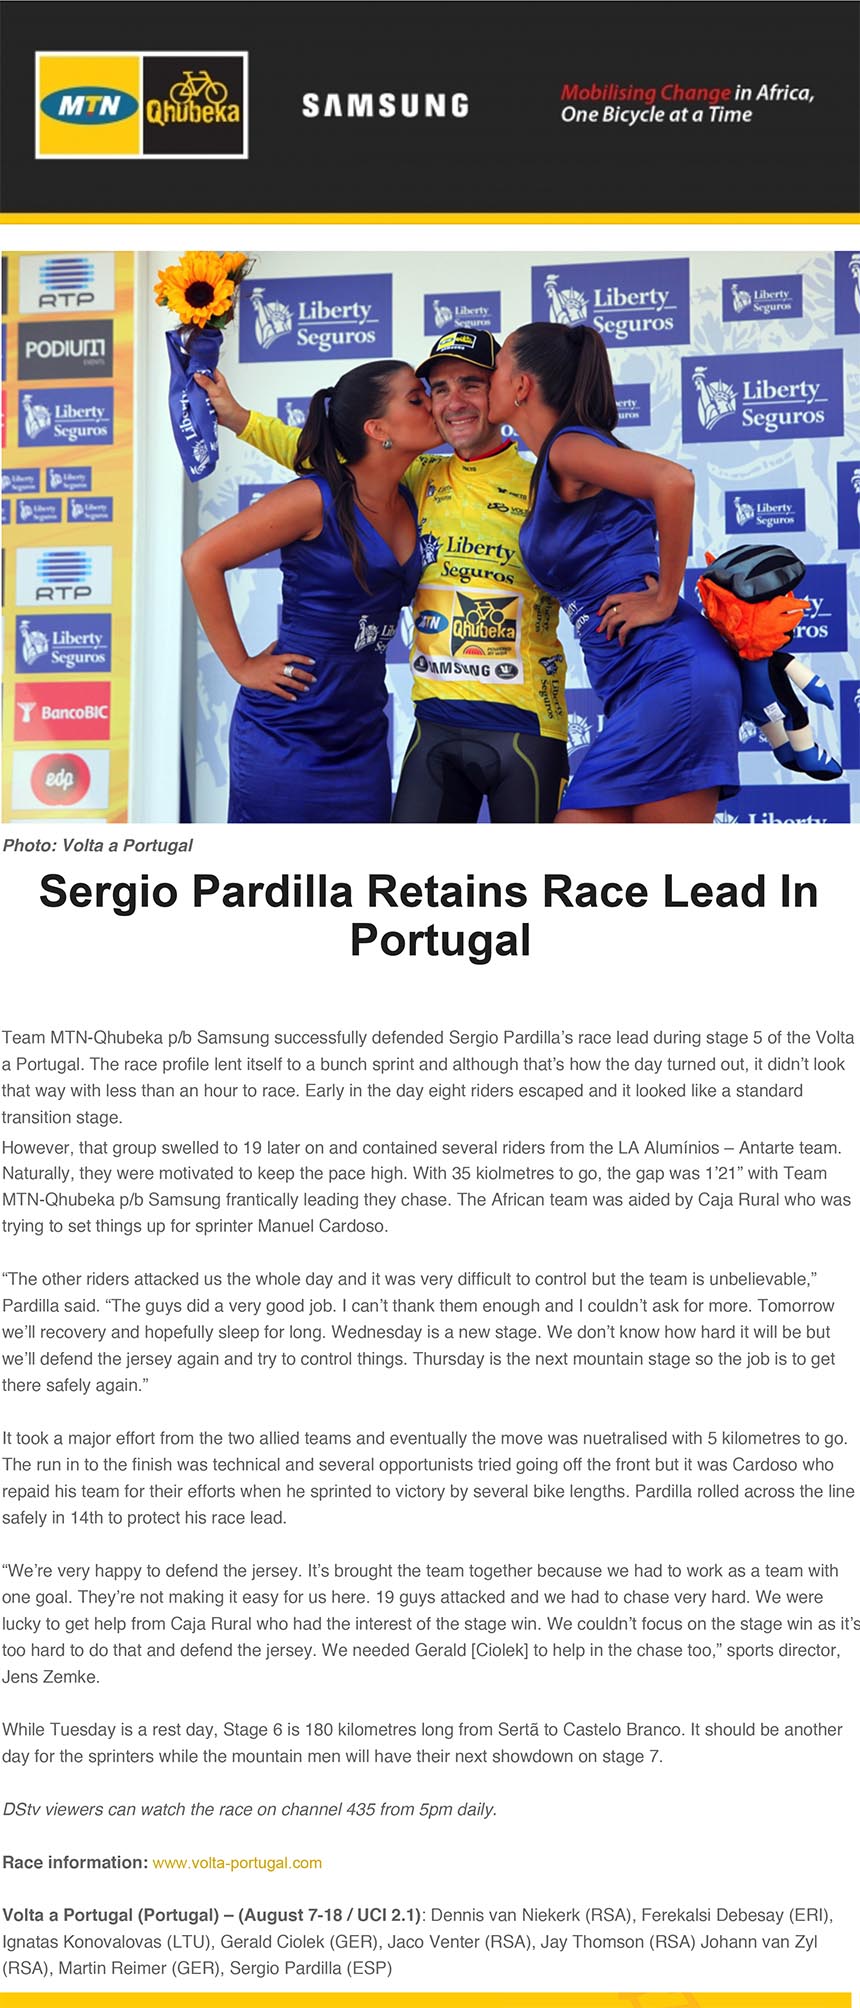 Sergio Pardilla Retains Race Lead In
Portugal
Team MTN-Qhubeka p/b Samsung successfully defended Sergio Pardilla’s race lead during stage 5 of the Volta
a Portugal. The race profile lent itself to a bunch sprint and although that’s how the day turned out, it didn’t look
that way with less than an hour to race. Early in the day eight riders escaped and it looked like a standard
transition stage.
However, that group swelled to 19 later on and contained several riders from the LA Alumínios – Antarte team. Naturally, they were motivated to keep the pace high. With 35 kiolmetres to go, the gap was 1’21” with Team
MTN-Qhubeka p/b Samsung frantically leading they chase. The African team was aided by Caja Rural who was
trying to set things up for sprinter Manuel Cardoso.
“The other riders attacked us the whole day and it was very difficult to control but the team is unbelievable,”
Pardilla said. “The guys did a very good job. I can’t thank them enough and I couldn’t ask for more. Tomorrow
we’ll recovery and hopefully sleep for long. Wednesday is a new stage. We don’t know how hard it will be but
we’ll defend the jersey again and try to control things. Thursday is the next mountain stage so the job is to get
there safely again.”
It took a major effort from the two allied teams and eventually the move was nuetralised with 5 kilometres to go.
The run in to the finish was technical and several opportunists tried going off the front but it was Cardoso who
repaid his team for their efforts when he sprinted to victory by several bike lengths. Pardilla rolled across the line
safely in 14th to protect his race lead.
“We’re very happy to defend the jersey. It’s brought the team together because we had to work as a team with
one goal. They’re not making it easy for us here. 19 guys attacked and we had to chase very hard. We were
lucky to get help from Caja Rural who had the interest of the stage win. We couldn’t focus on the stage win as it’s
too hard to do that and defend the jersey. We needed Gerald [Ciolek] to help in the chase too,” sports director,
Jens Zemke.
While Tuesday is a rest day, Stage 6 is 180 kilometres long from Sertã to Castelo Branco. It should be another
day for the sprinters while the mountain men will have their next showdown on stage 7.
DStv viewers can watch the race on channel 435 from 5pm daily.
Race information: www.volta-portugal.com
Volta a Portugal (Portugal) – (August 7-18 / UCI 2.1): Dennis van Niekerk (RSA), Ferekalsi Debesay (ERI),
Ignatas Konovalovas (LTU), Gerald Ciolek (GER), Jaco Venter (RSA), Jay Thomson